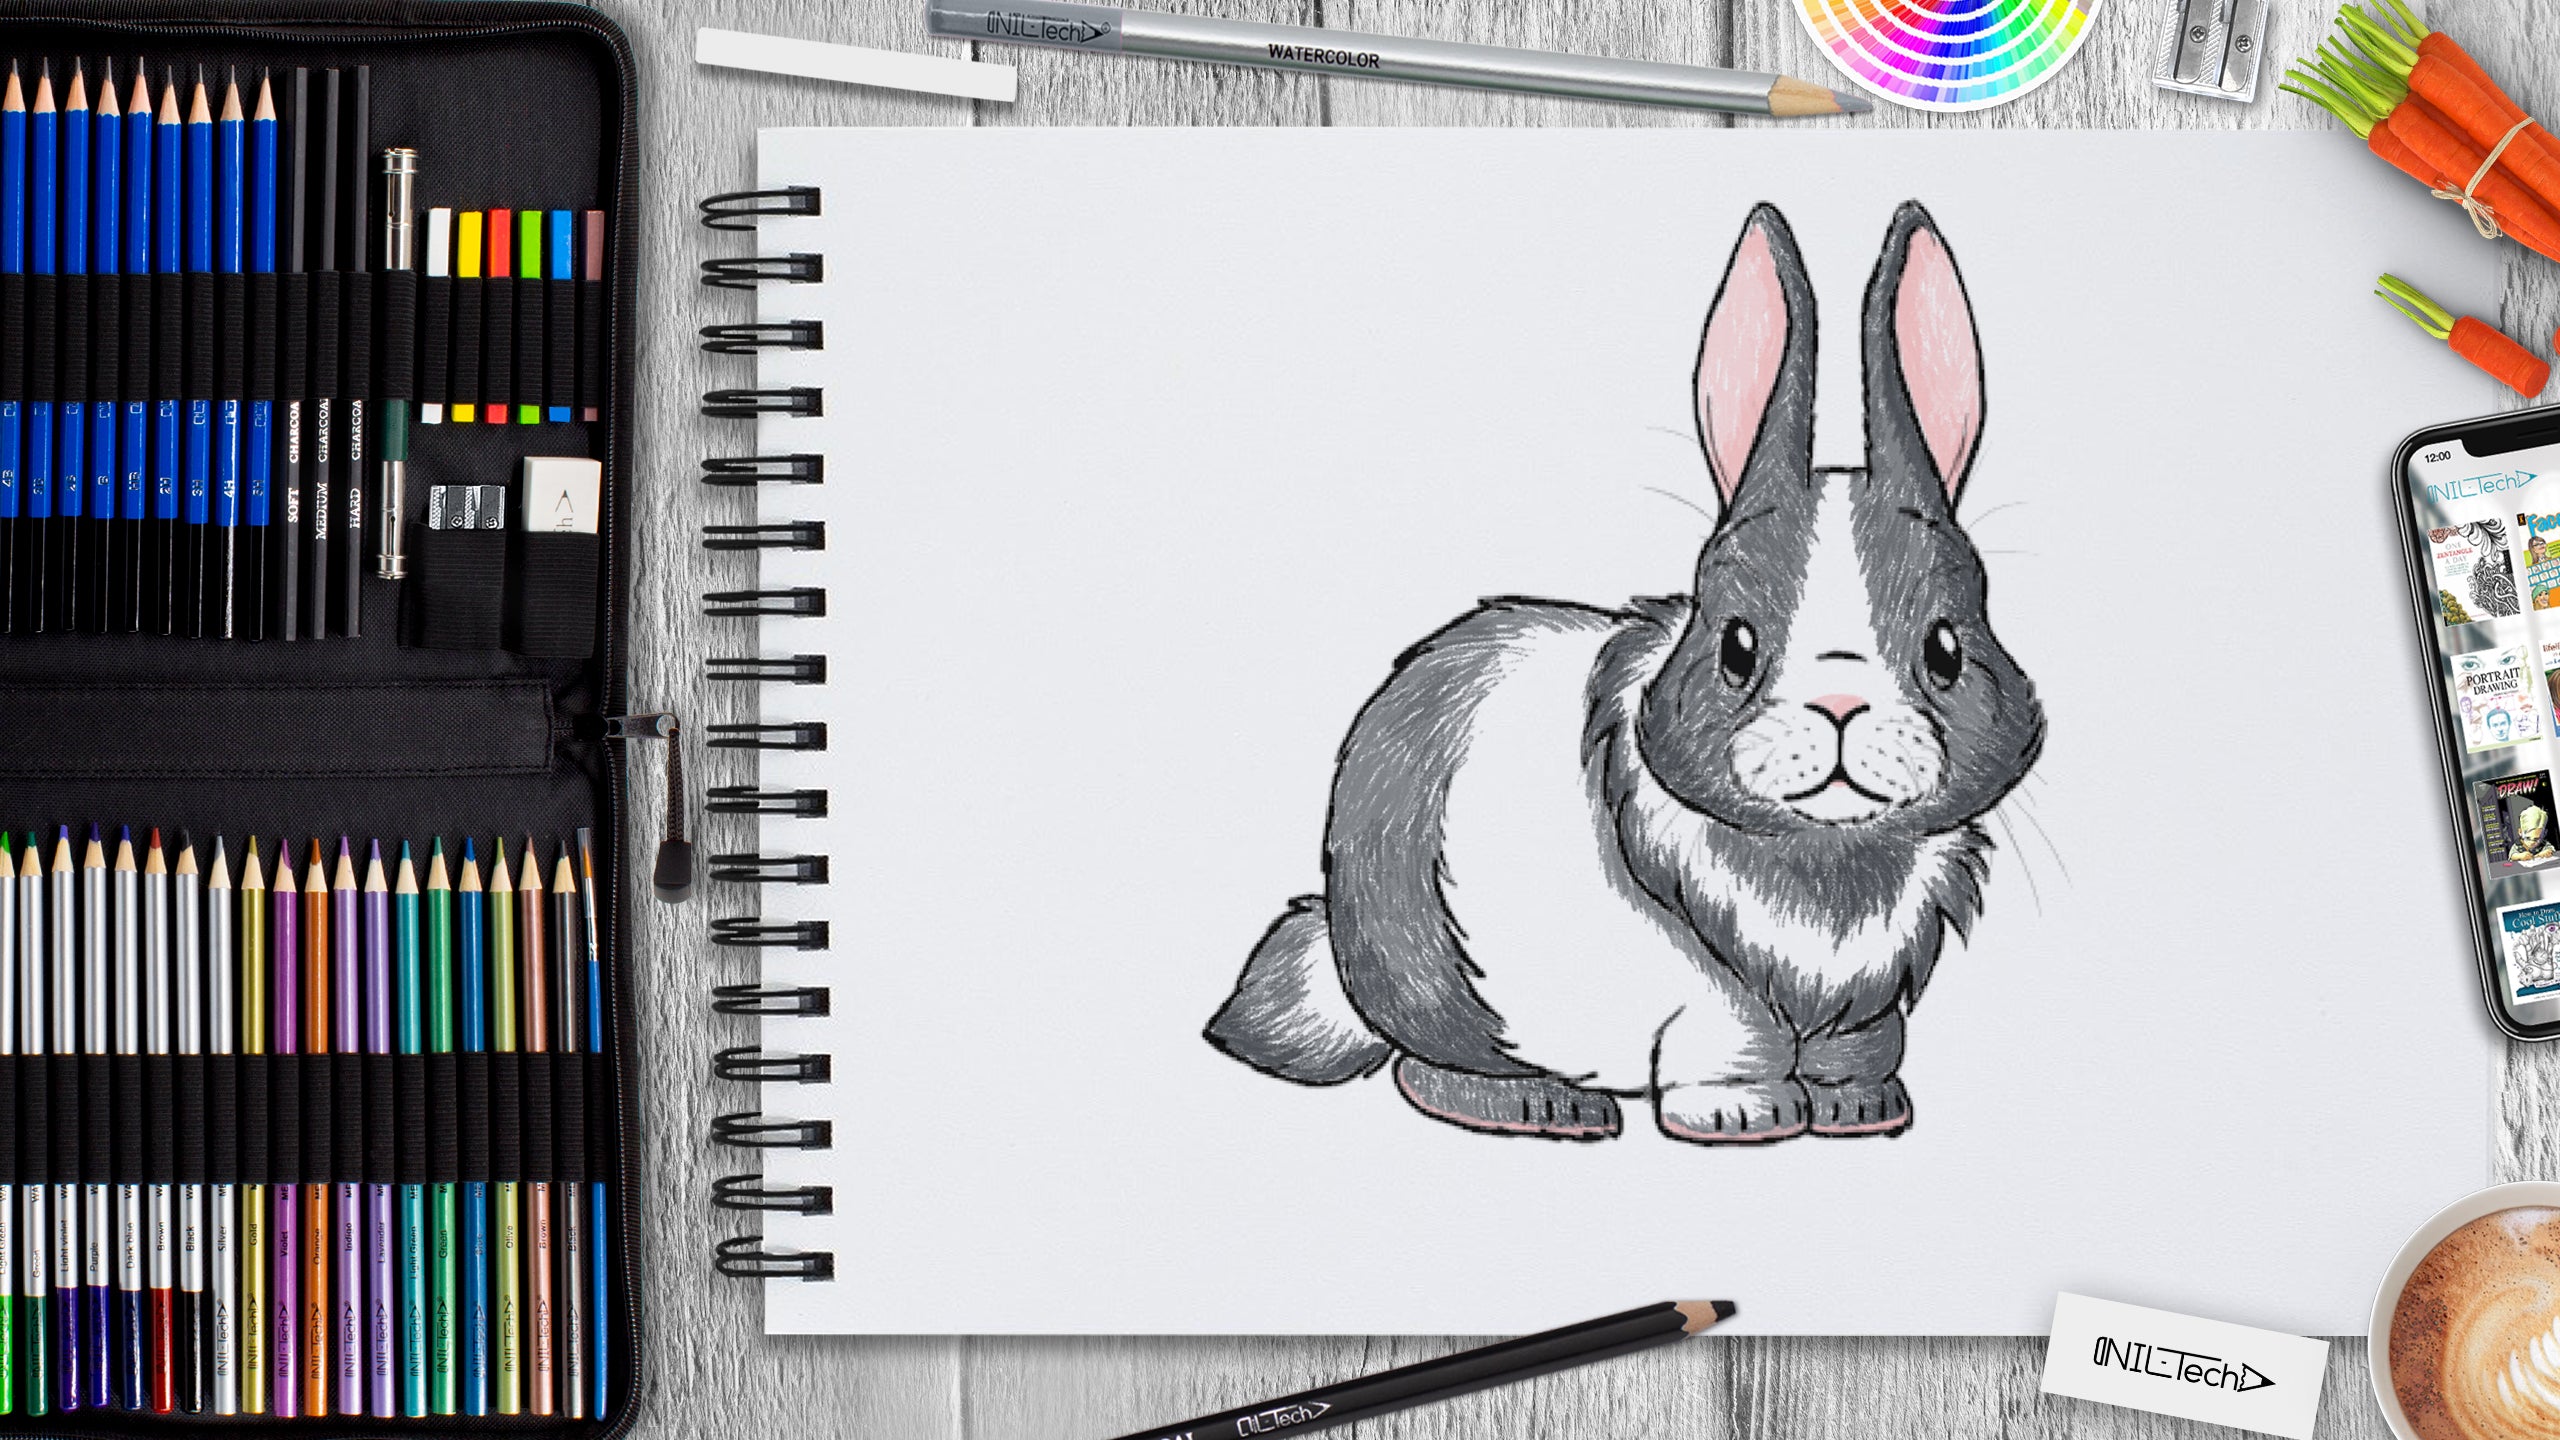 How to draw a rabbit or bunny- in easy steps advanced tutorial - YouTube